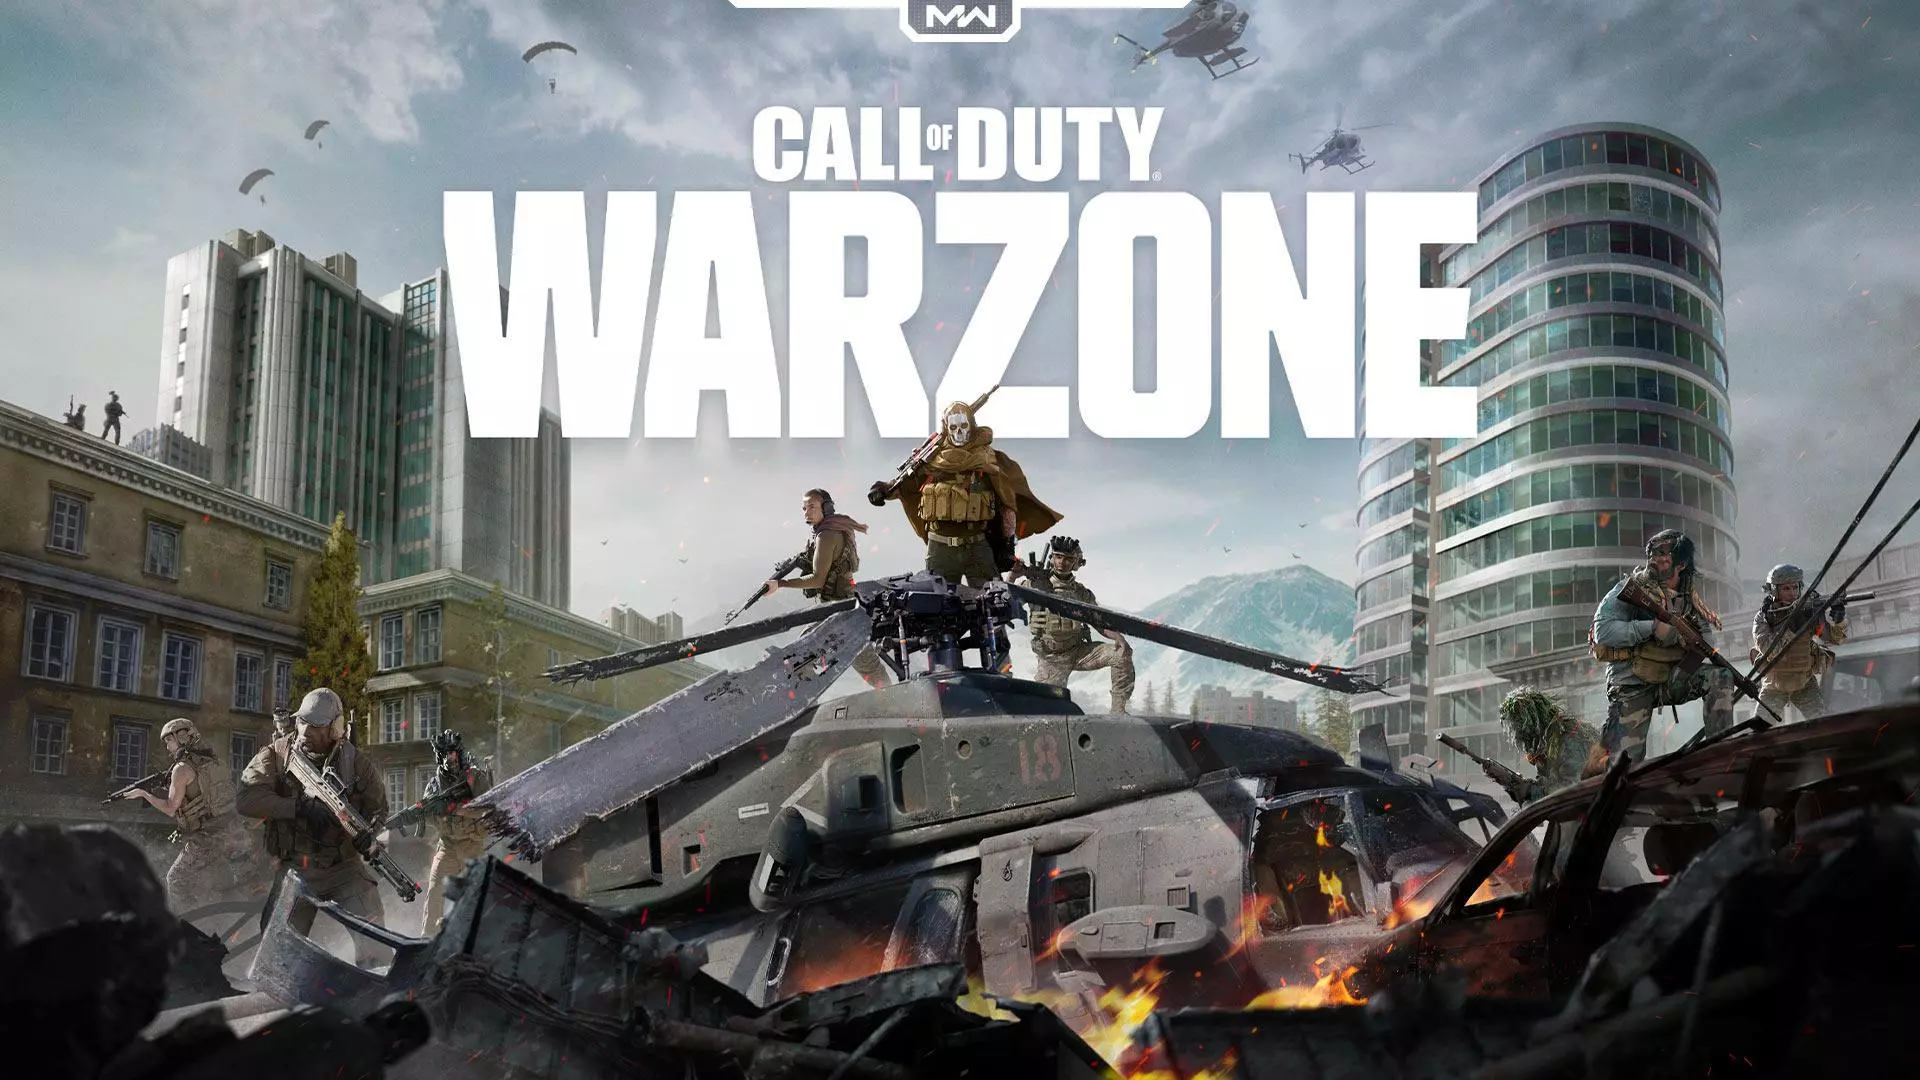 COD Warzone: Activision Ban Over 60,000 Accounts In Response To Mass Cheating Complaints